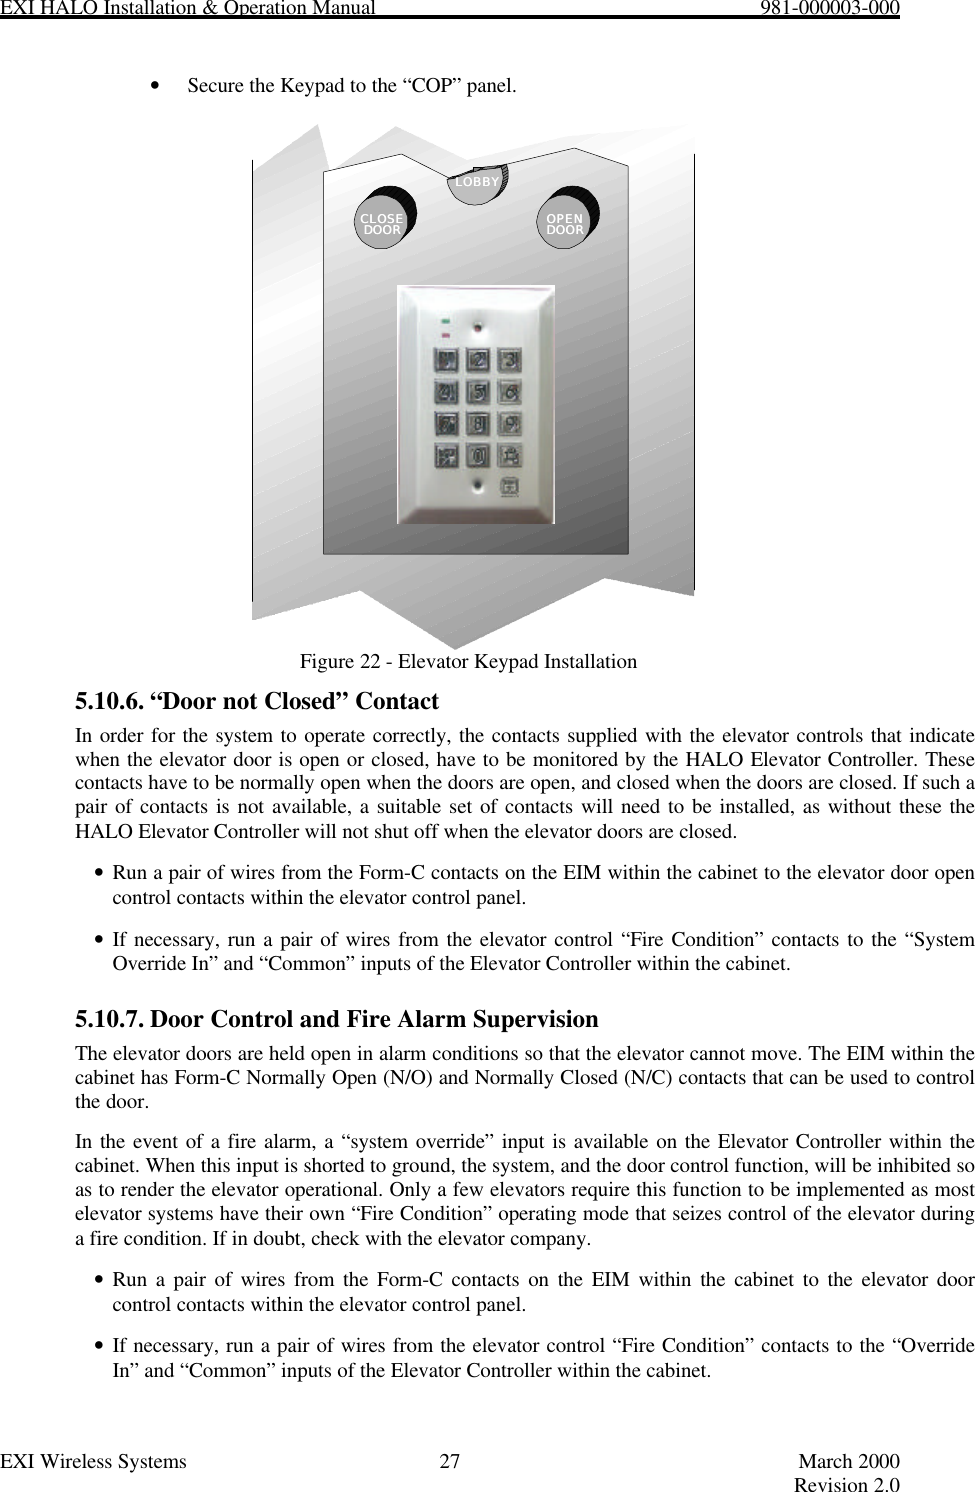 EXI HALO Installation &amp; Operation Manual                                                            981-000003-000EXI Wireless Systems 27 March 2000Revision 2.0• Secure the Keypad to the “COP” panel.Figure 22 - Elevator Keypad Installation5.10.6. “Door not Closed” ContactIn order for the system to operate correctly, the contacts supplied with the elevator controls that indicatewhen the elevator door is open or closed, have to be monitored by the HALO Elevator Controller. Thesecontacts have to be normally open when the doors are open, and closed when the doors are closed. If such apair of contacts is not available, a suitable set of contacts will need to be installed, as without these theHALO Elevator Controller will not shut off when the elevator doors are closed.• Run a pair of wires from the Form-C contacts on the EIM within the cabinet to the elevator door opencontrol contacts within the elevator control panel.• If necessary, run a pair of wires from the elevator control “Fire Condition” contacts to the “SystemOverride In” and “Common” inputs of the Elevator Controller within the cabinet.5.10.7. Door Control and Fire Alarm SupervisionThe elevator doors are held open in alarm conditions so that the elevator cannot move. The EIM within thecabinet has Form-C Normally Open (N/O) and Normally Closed (N/C) contacts that can be used to controlthe door.In the event of a fire alarm, a “system override” input is available on the Elevator Controller within thecabinet. When this input is shorted to ground, the system, and the door control function, will be inhibited soas to render the elevator operational. Only a few elevators require this function to be implemented as mostelevator systems have their own “Fire Condition” operating mode that seizes control of the elevator duringa fire condition. If in doubt, check with the elevator company.• Run a pair of wires from the Form-C contacts on the EIM within the cabinet to the elevator doorcontrol contacts within the elevator control panel.• If necessary, run a pair of wires from the elevator control “Fire Condition” contacts to the “OverrideIn” and “Common” inputs of the Elevator Controller within the cabinet.CLOSECLOSEDOORDOOR OPENOPENDOORDOORLOBBYLOBBY